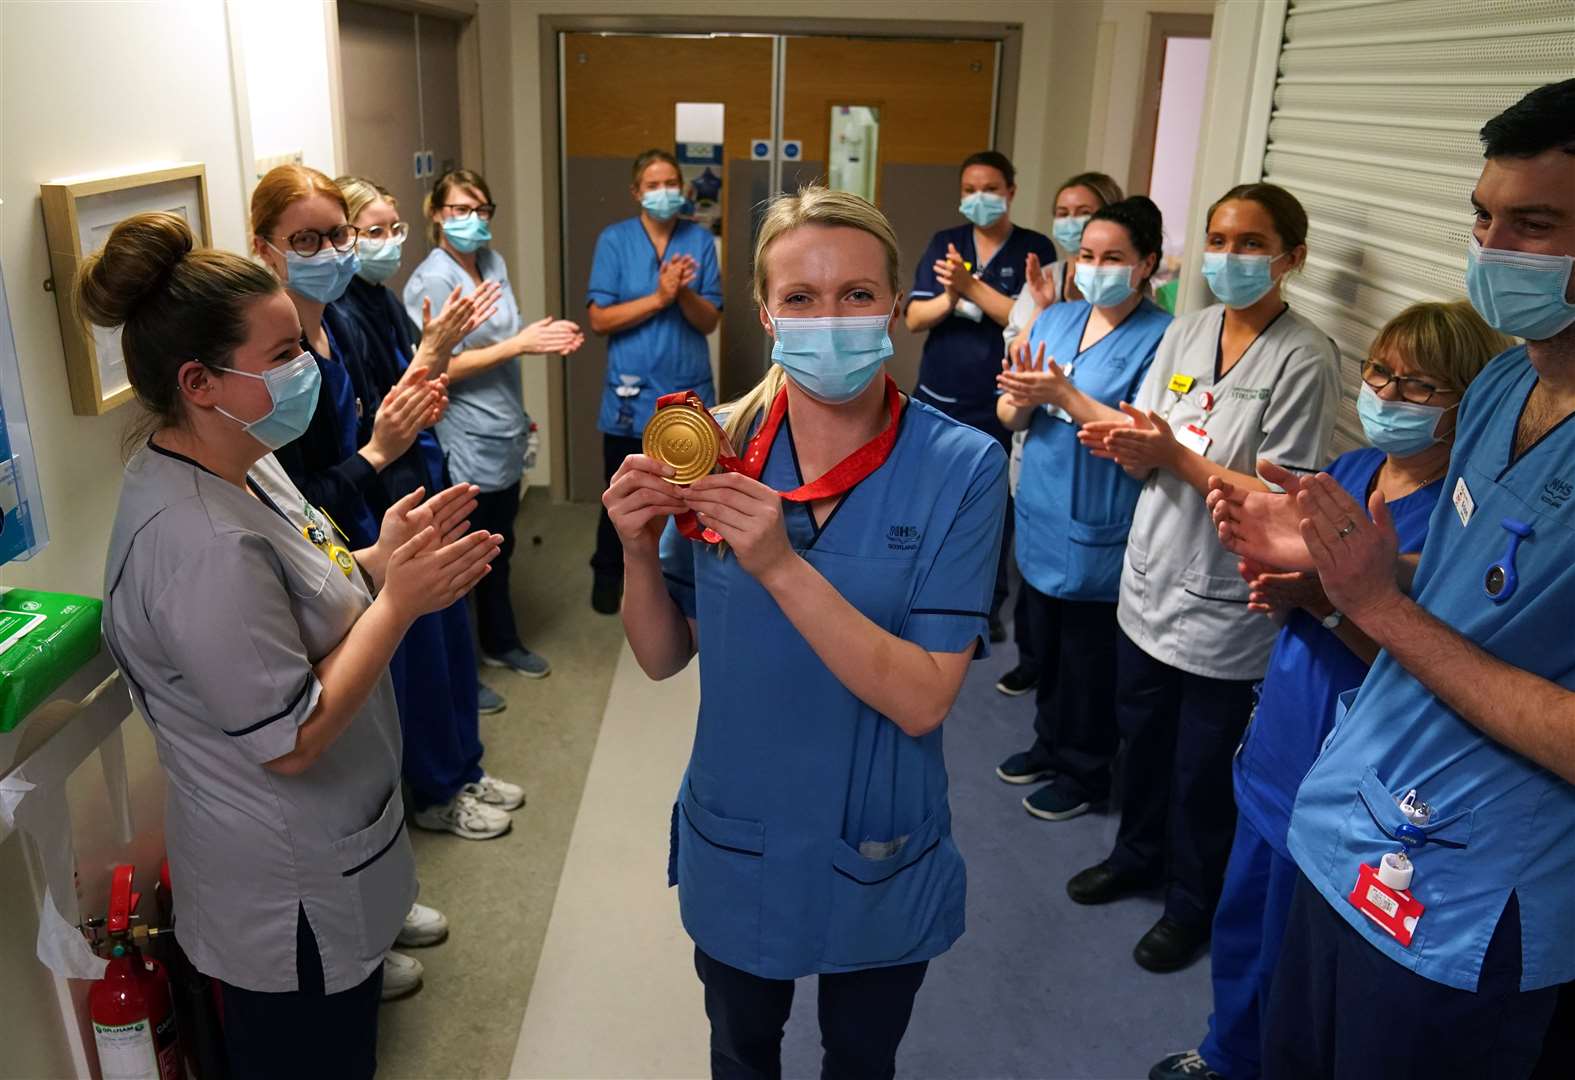 The curler said she would never forget the reception she received from hospital colleagues when she returned from Beijing. (Andrew Milligan/PA)